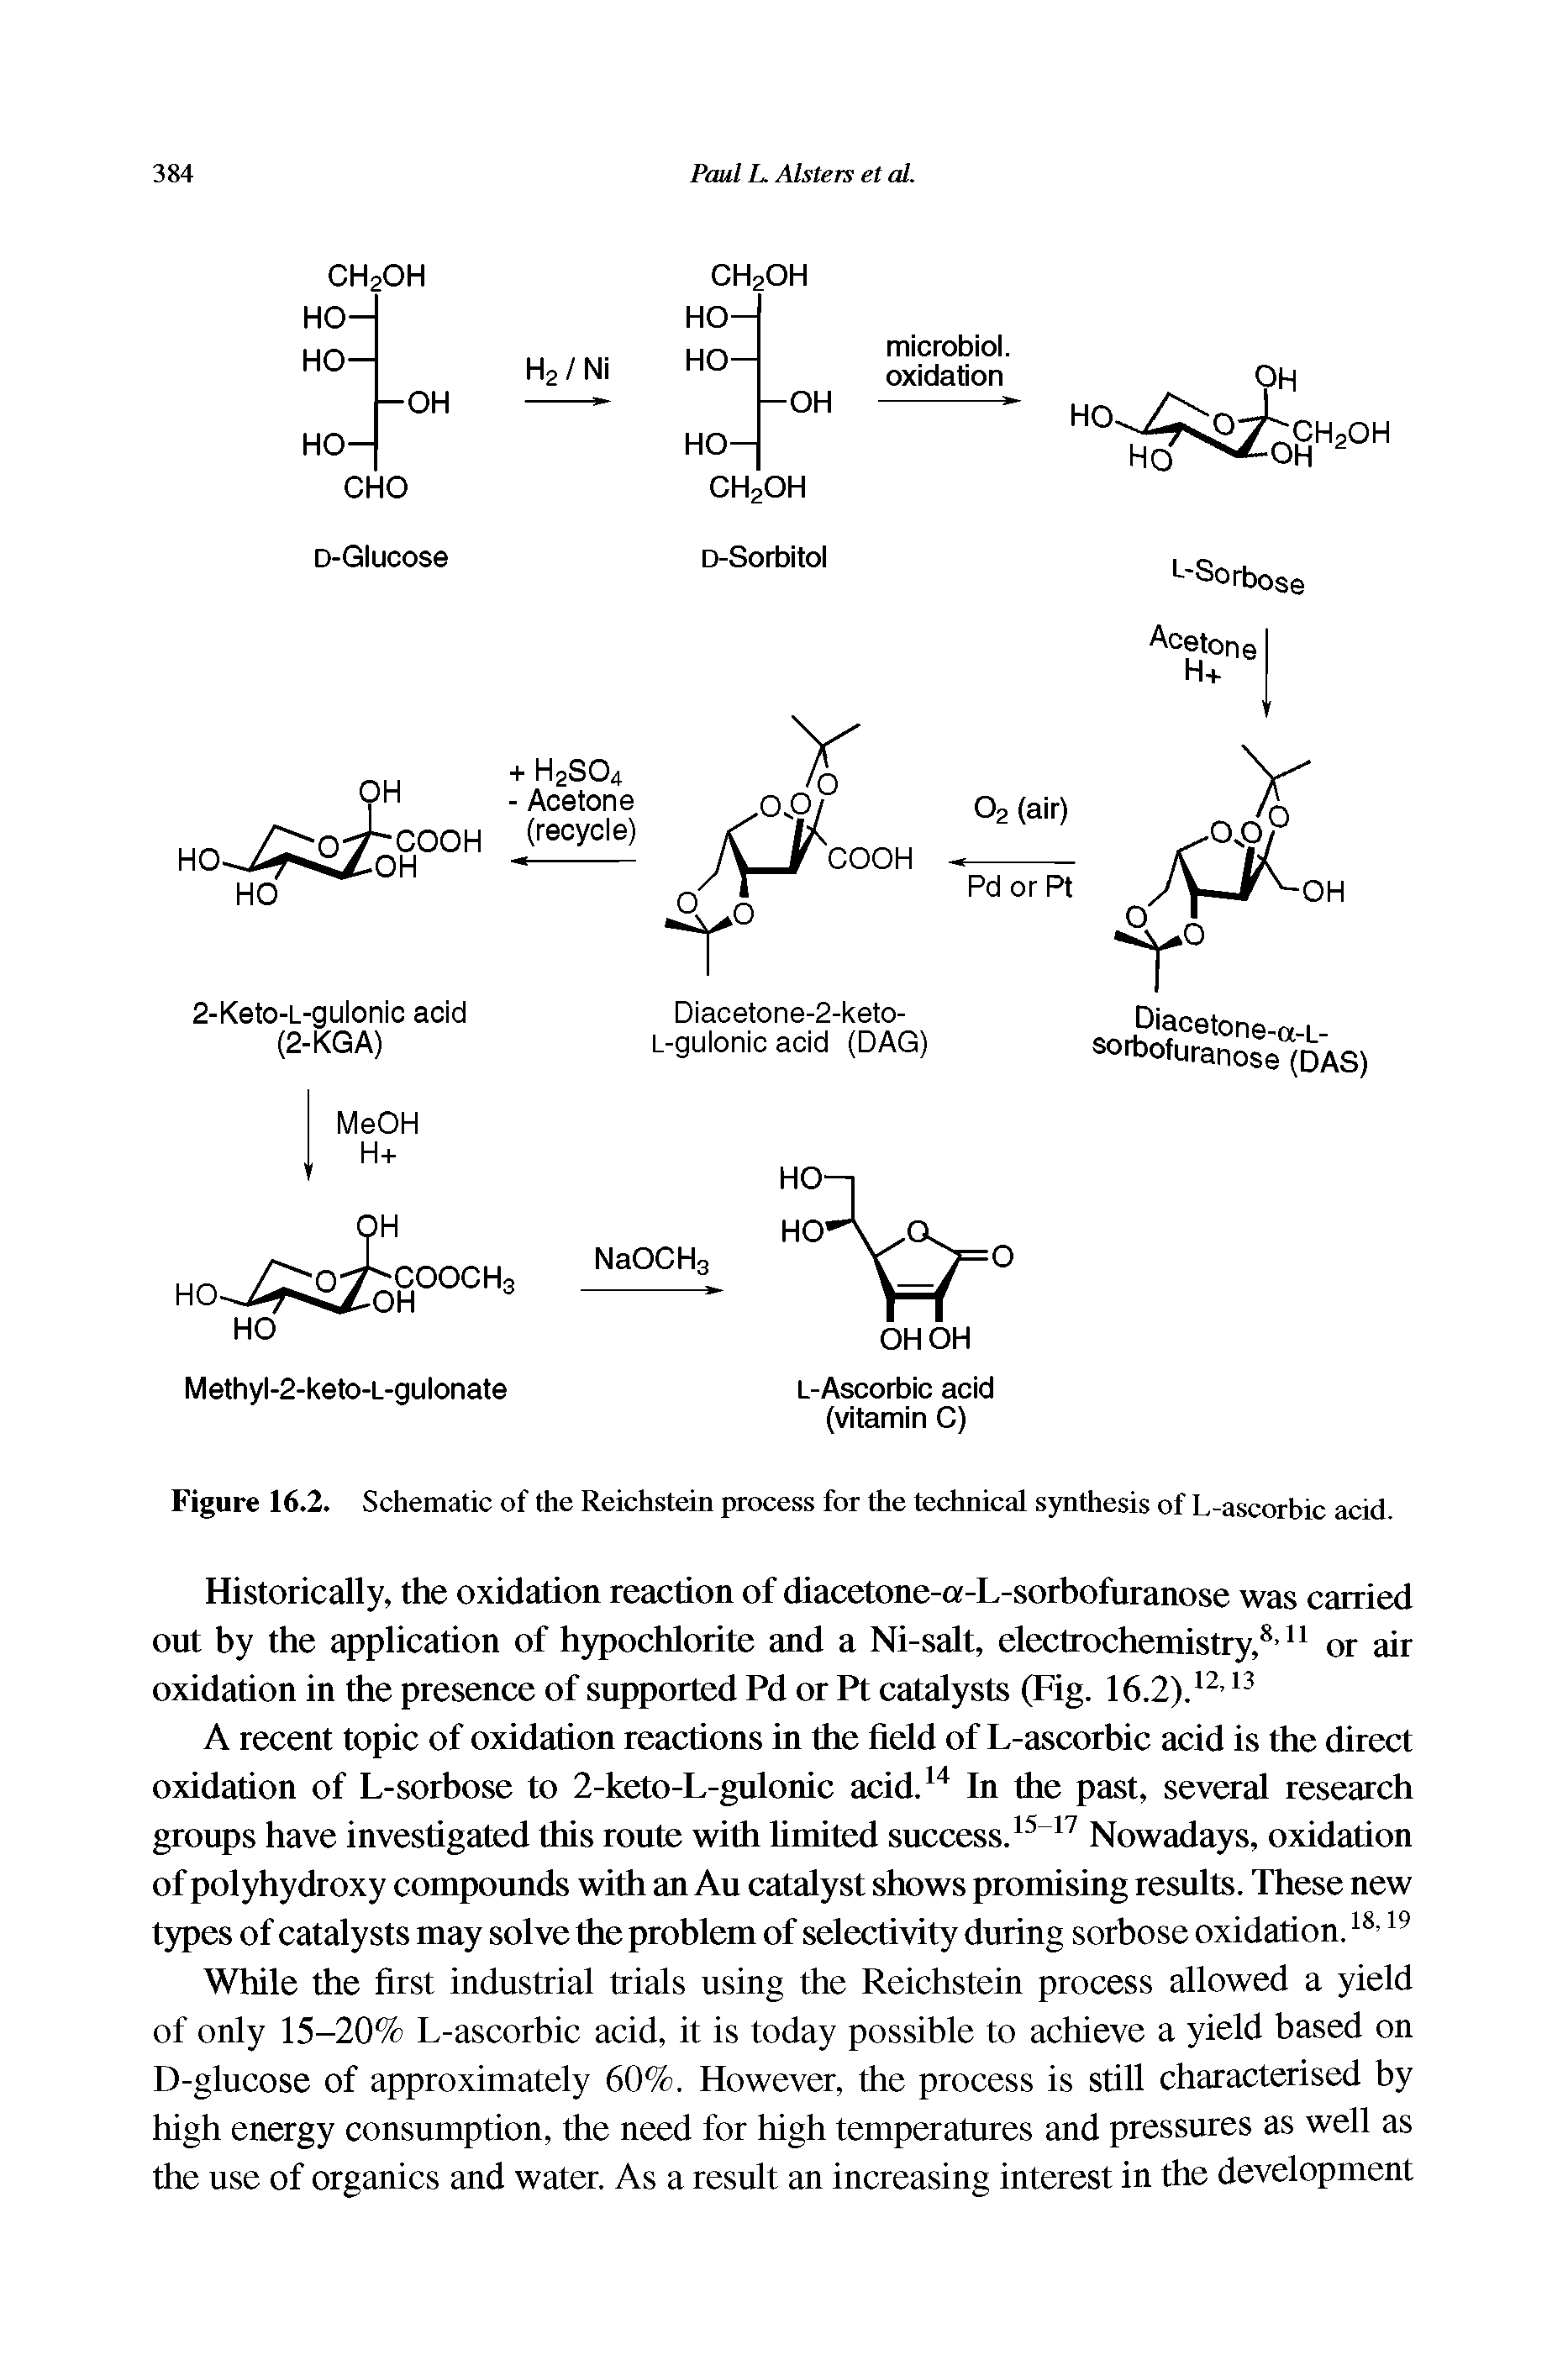 Figure 16.2. Schematic of the Reichstein process for the technical synthesis of L-ascorbic acid.